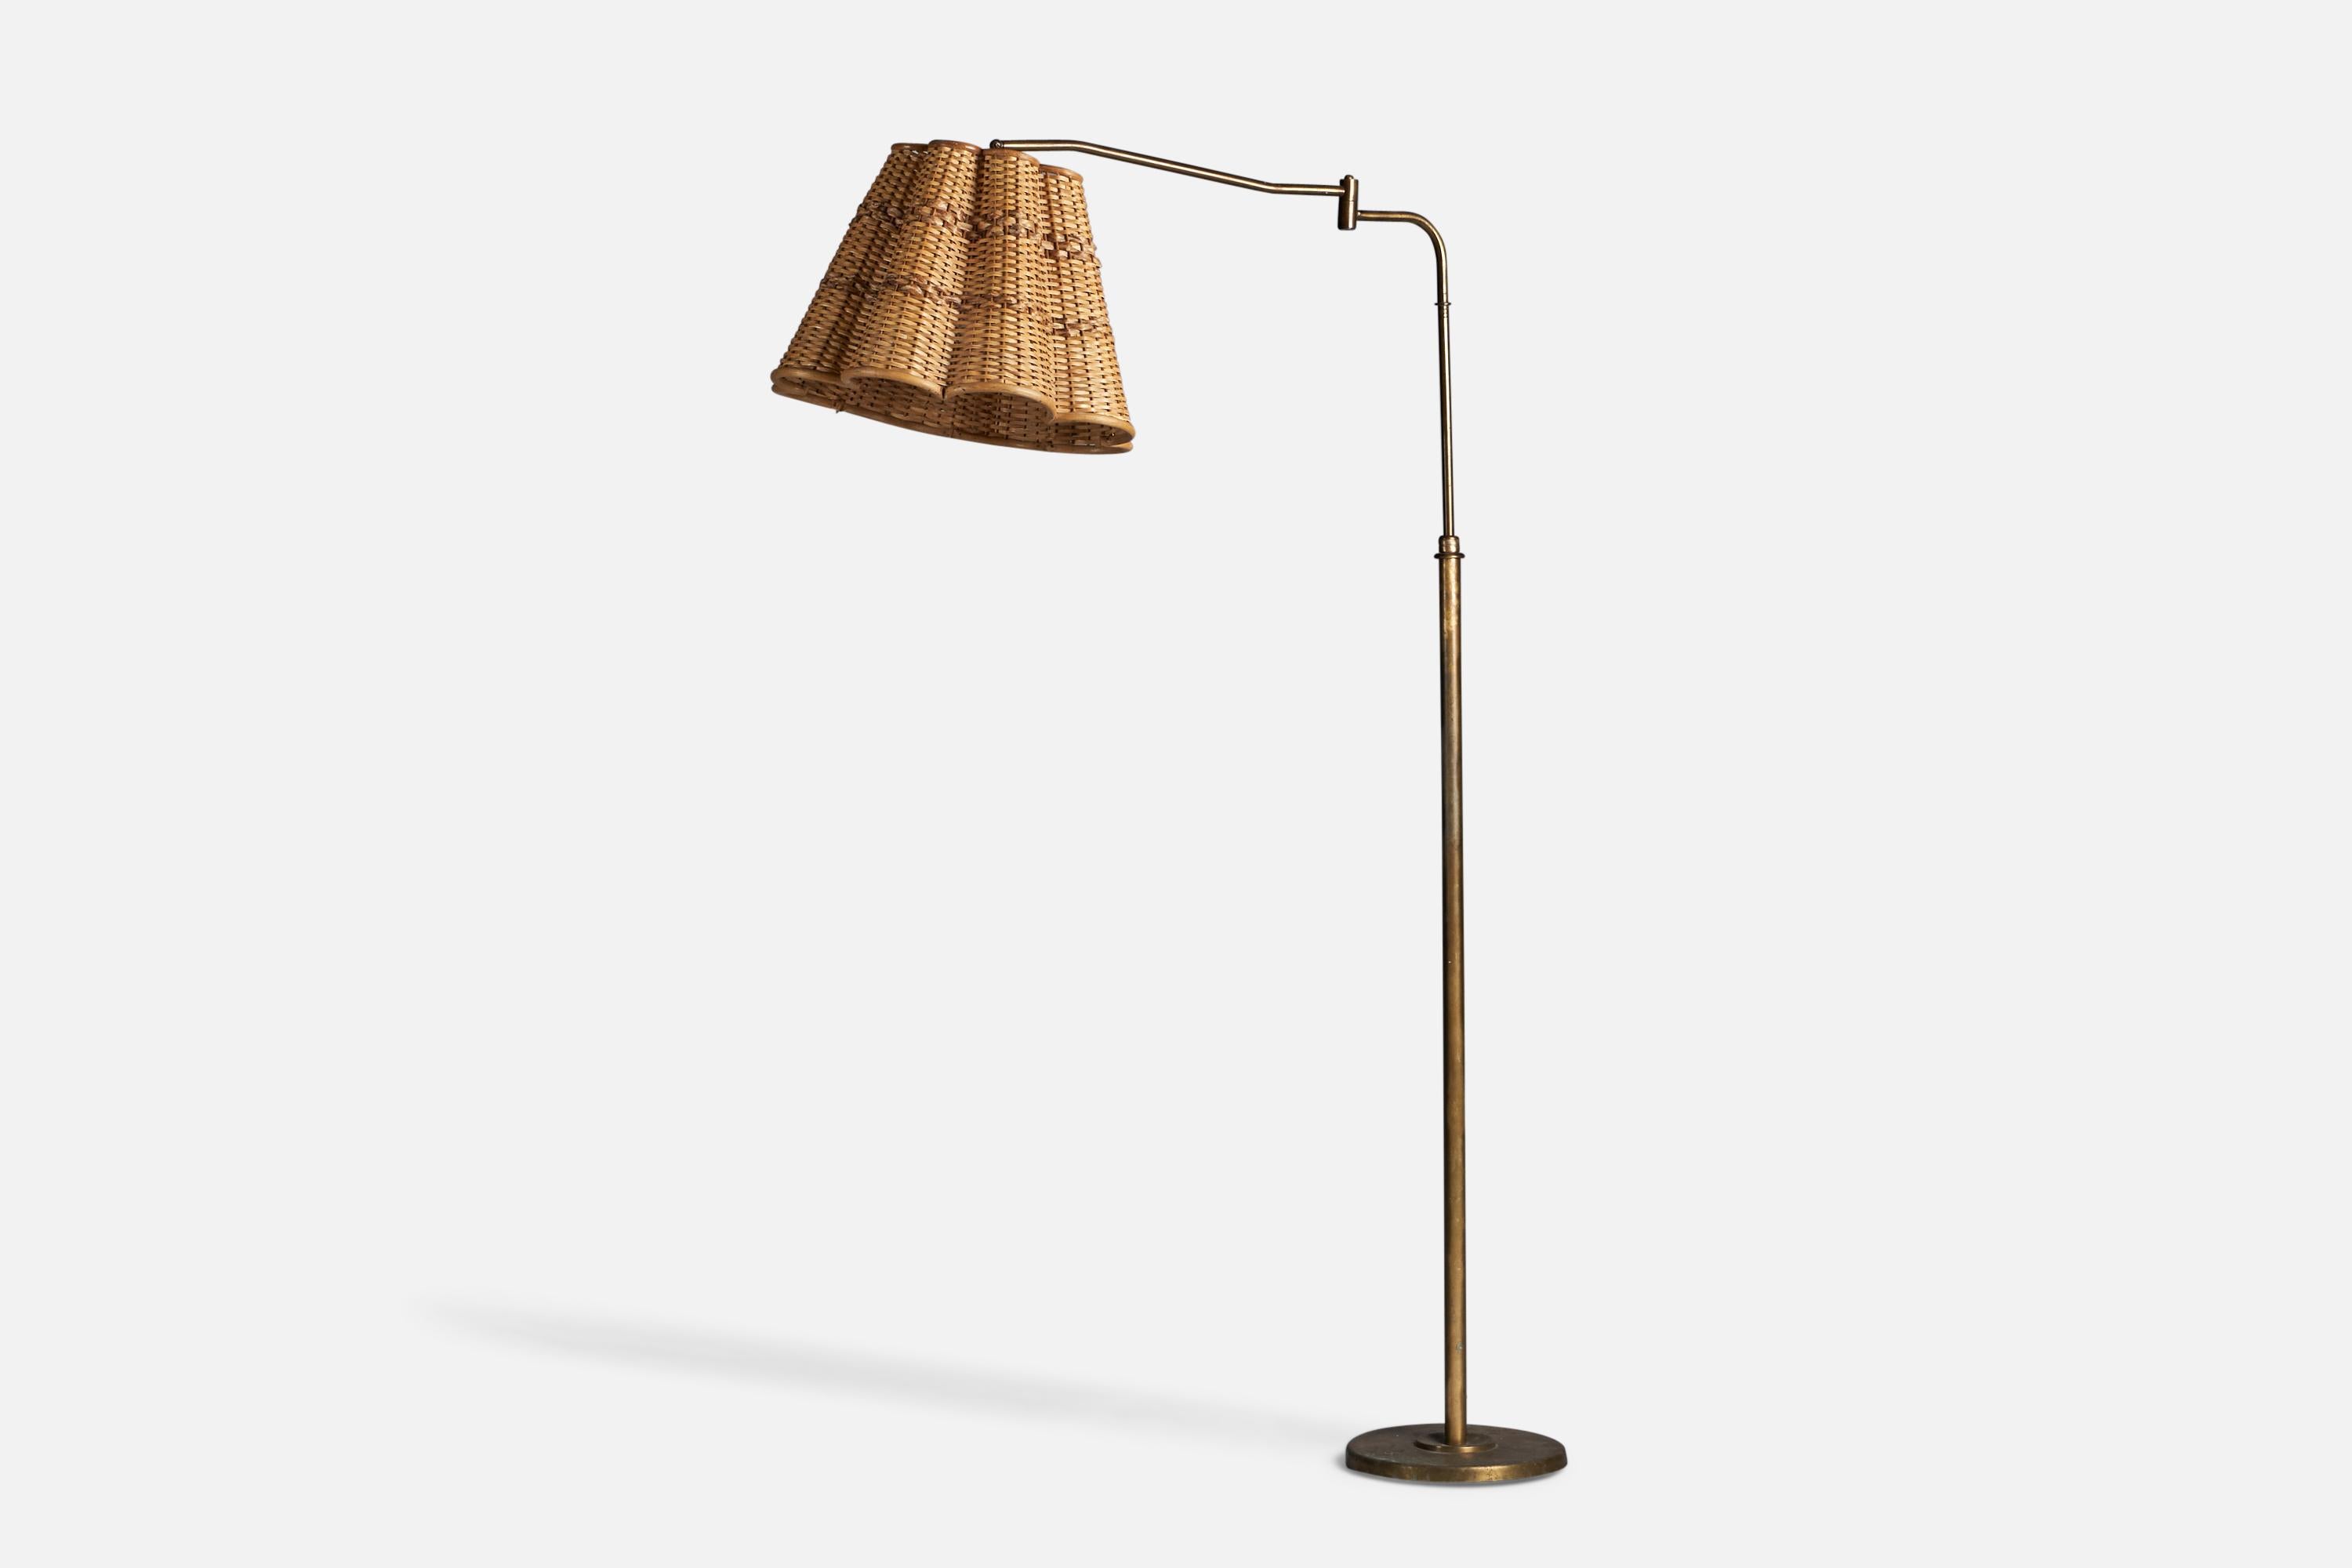 An adjustable brass and rattan floor lamp, designed and produced in Italy, 1940s.

Overall Dimensions (inches): 69.8